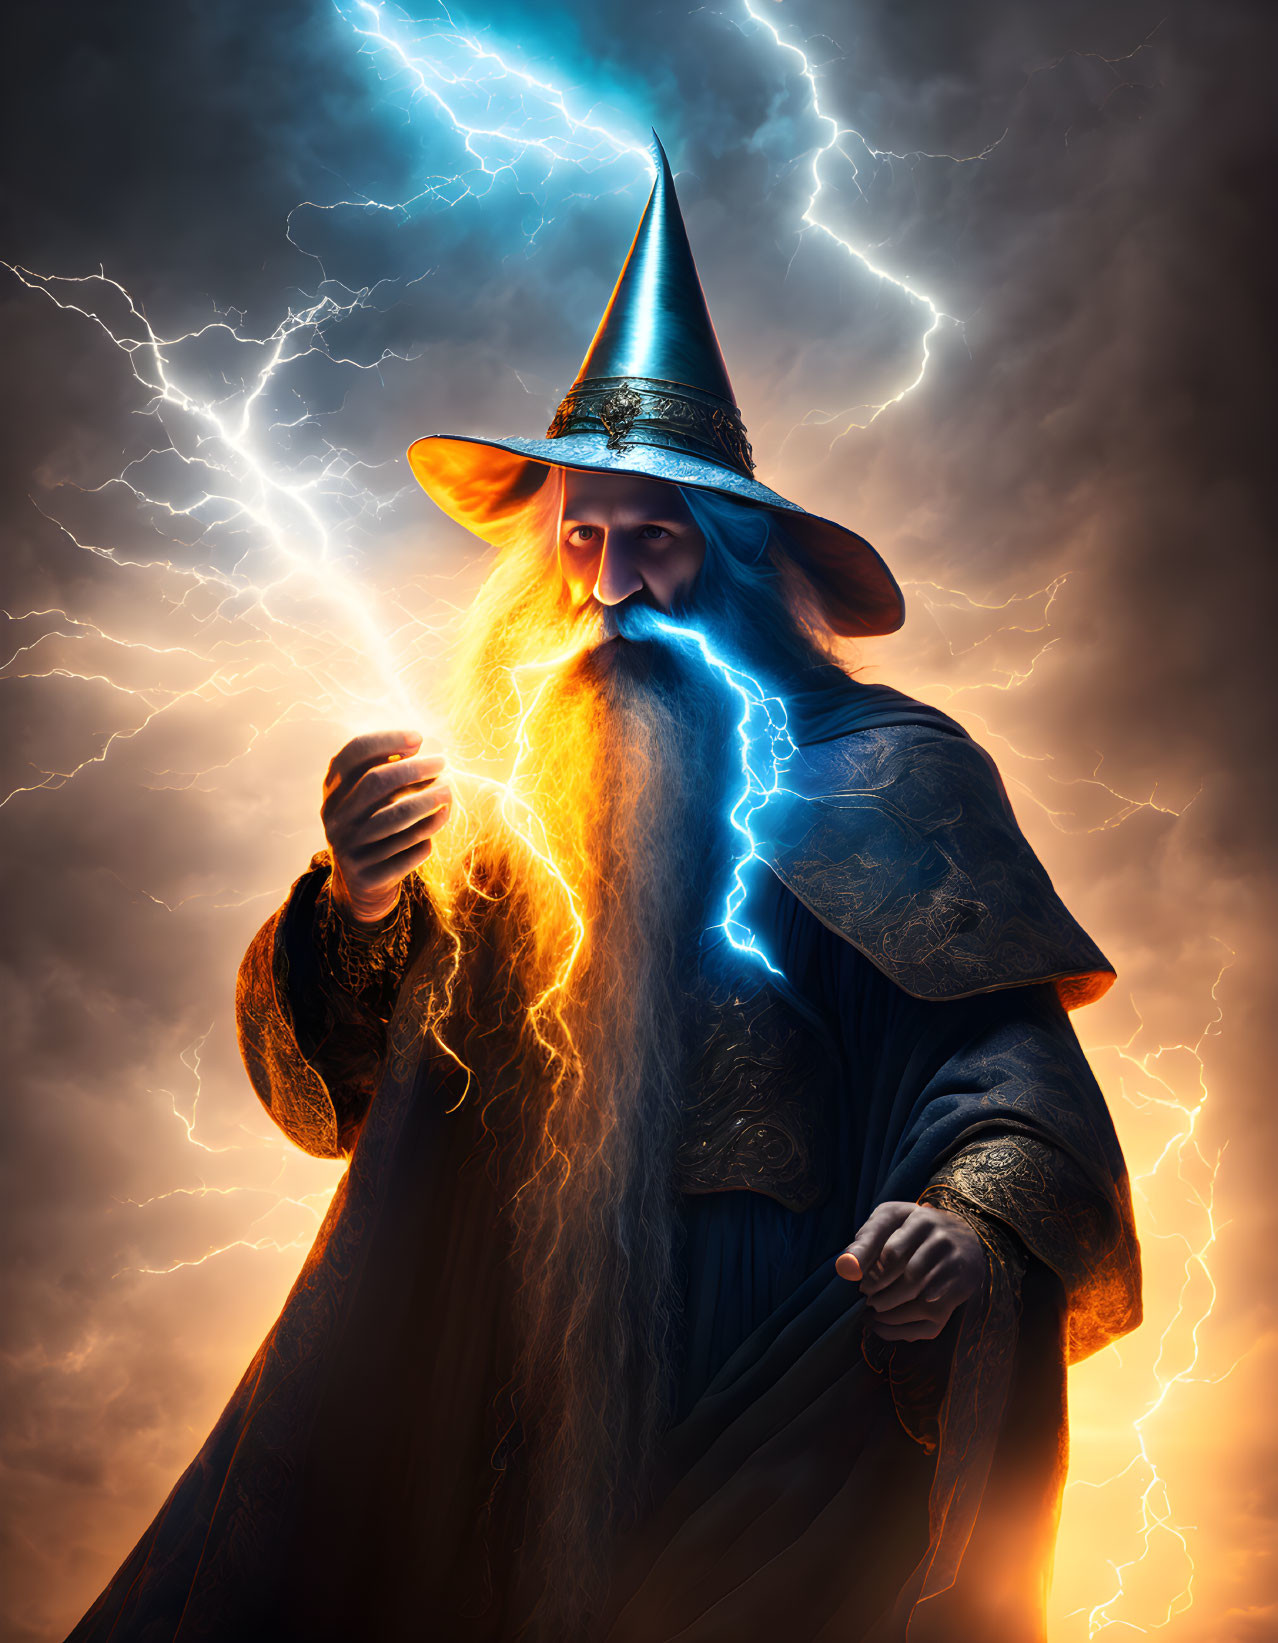 The ancient lightning wizard